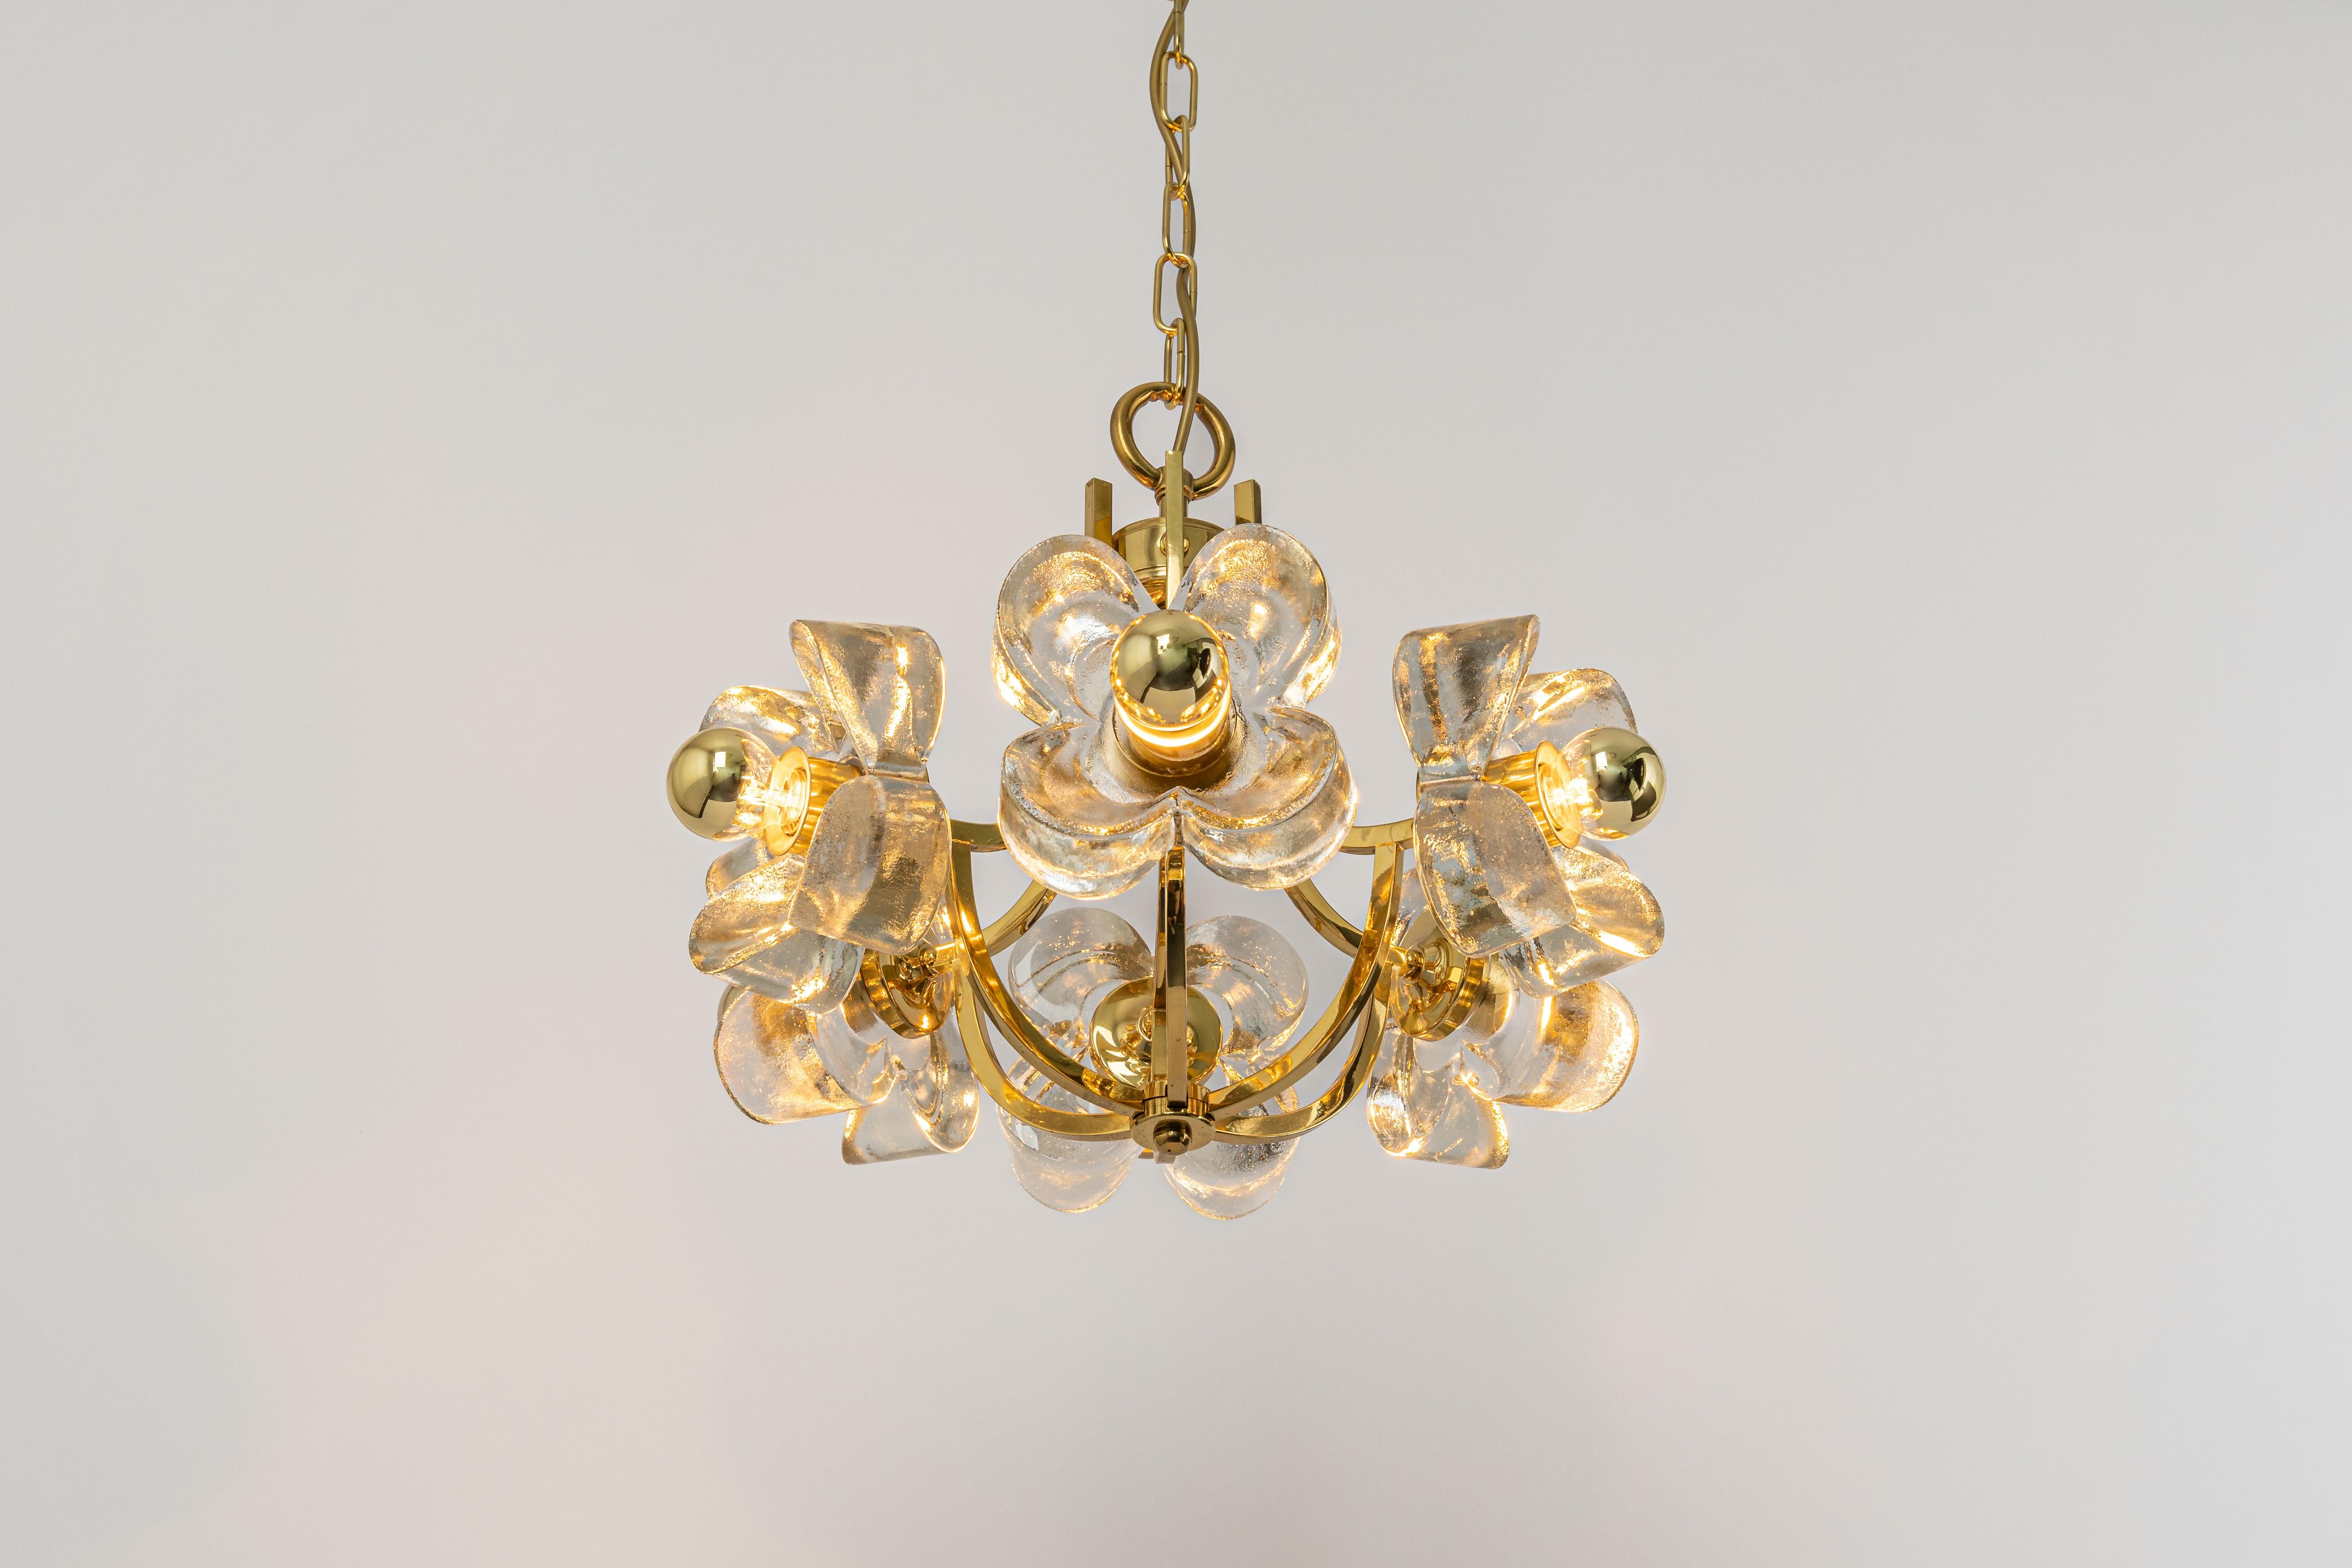 1 of 2 Large Brass and Crystal Glass Pendant by Sische, Germany, 1970s For Sale 3